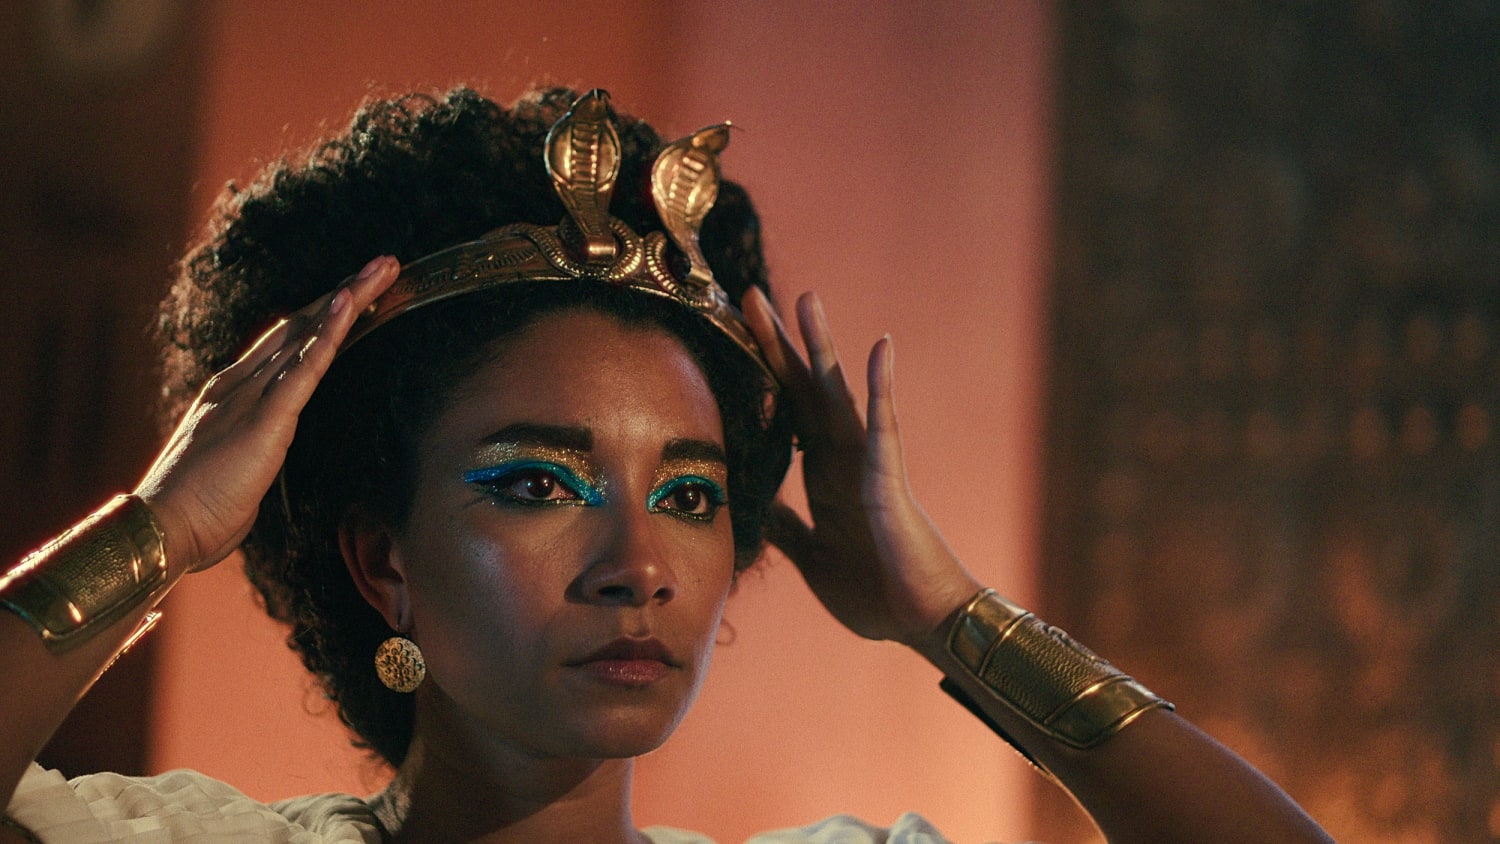 The Egyptian broadcaster makes his own doc with the fair-skinned Cleopatra